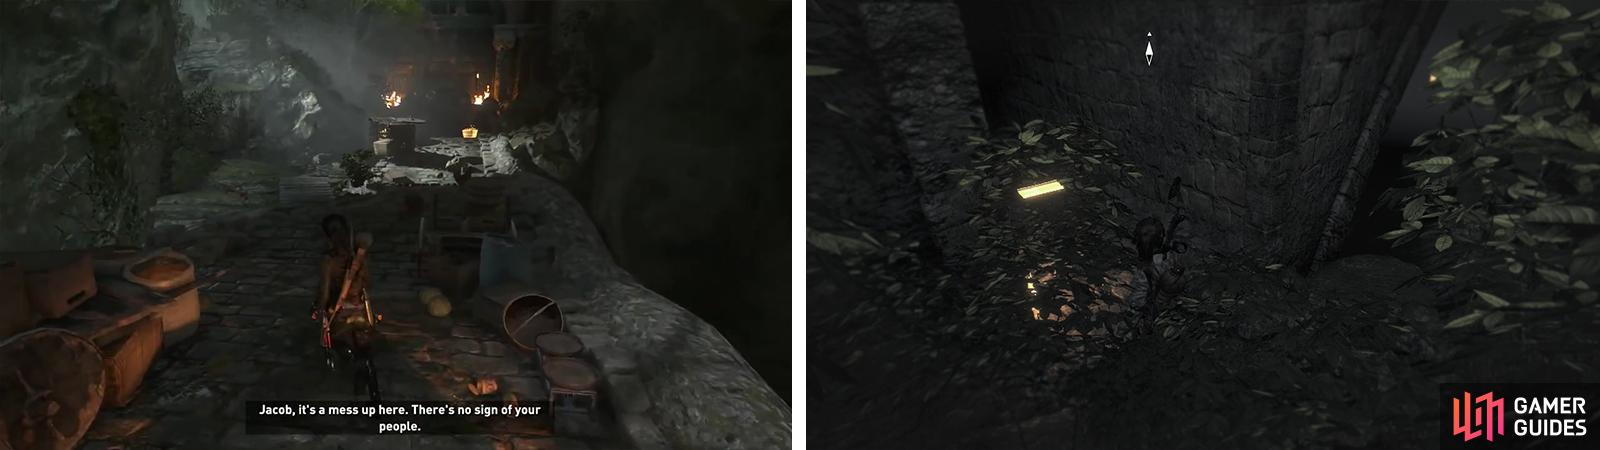 After entering the region (left), look beneath the bridge to find Document 01 (right).